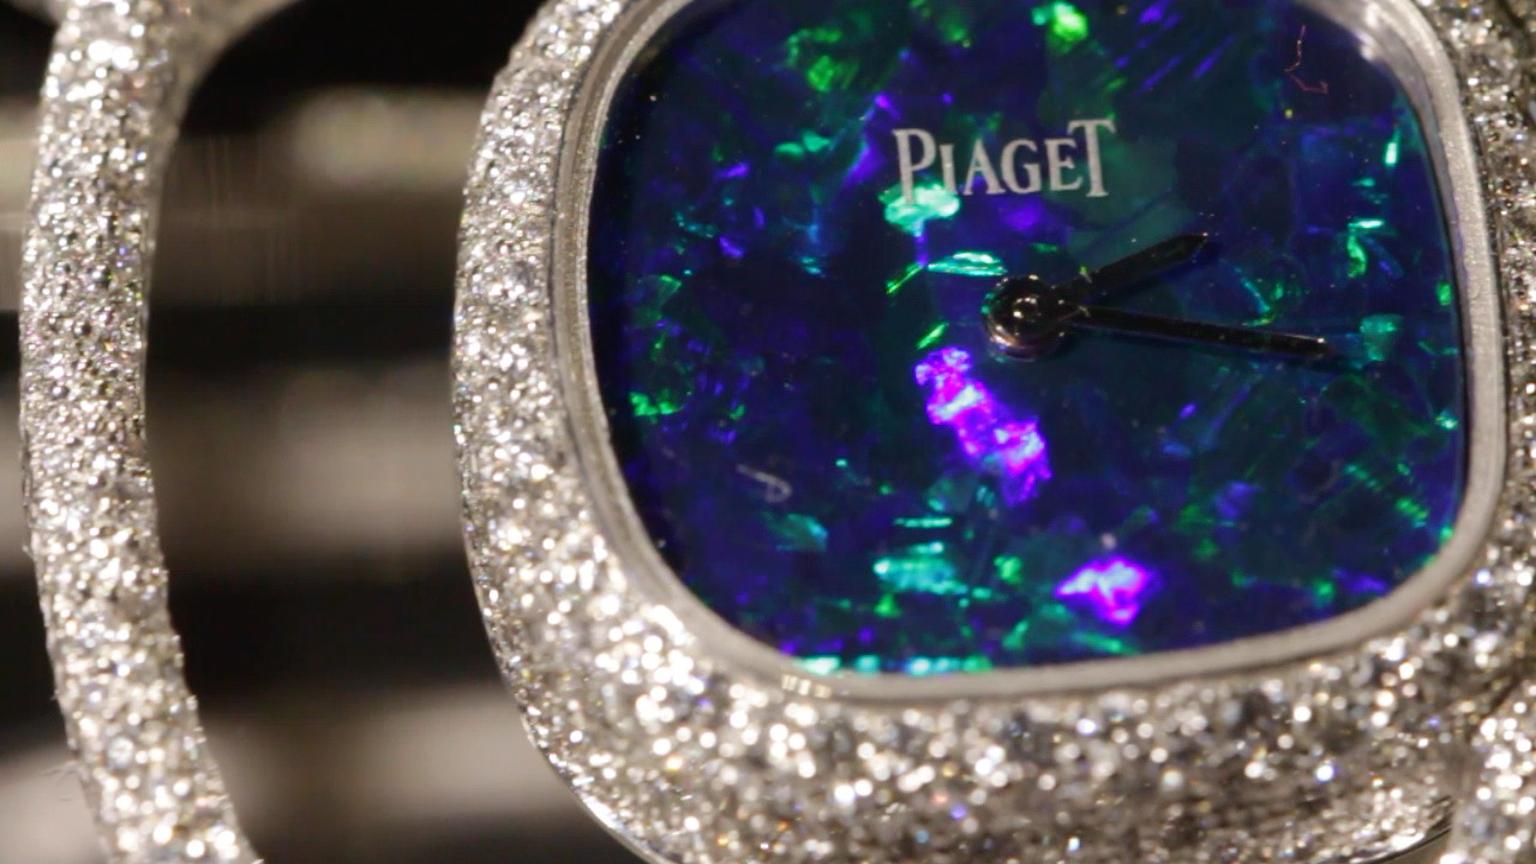 The Extremely Piaget collection Reversible cuff watch in white gold is set with 11.7ct of 2,008 brilliant-cut diamonds in a snow-setting. It also features a natural opal dial on the front and natural onyx dial on the back.